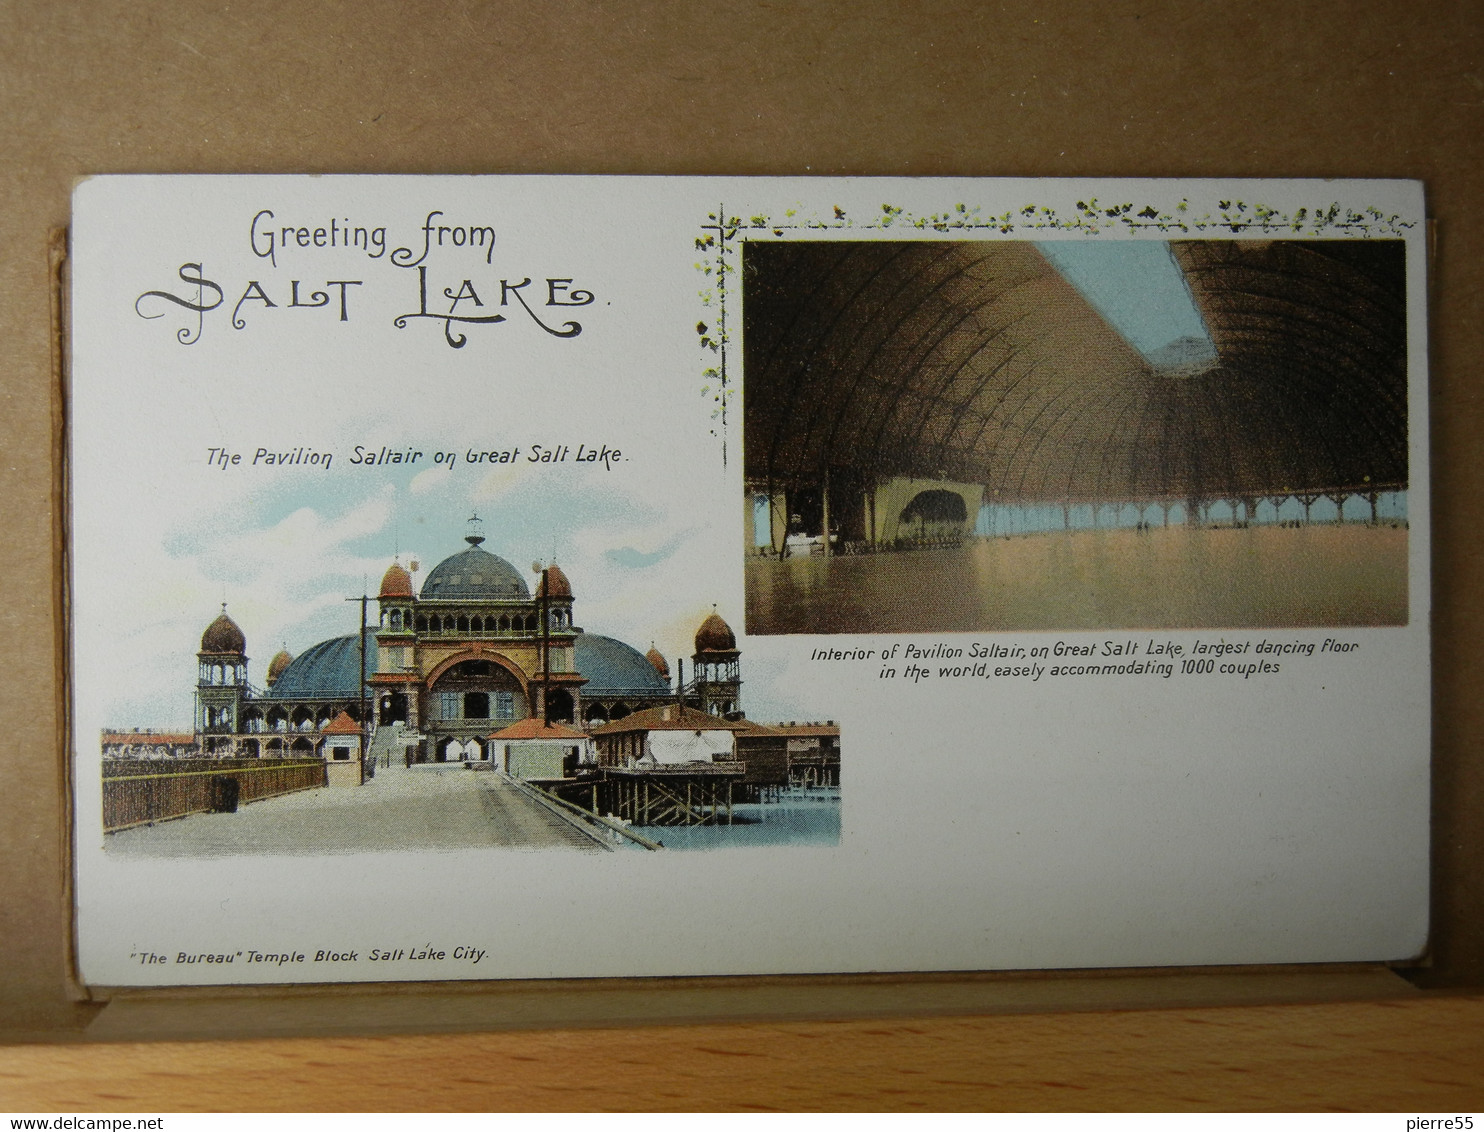 USA - GREETING FROM SALT LAKE - PAVILION SALTAIR - FINE CONDITION - NOT SENT -  LITHOGRAPHY - Salt Lake City